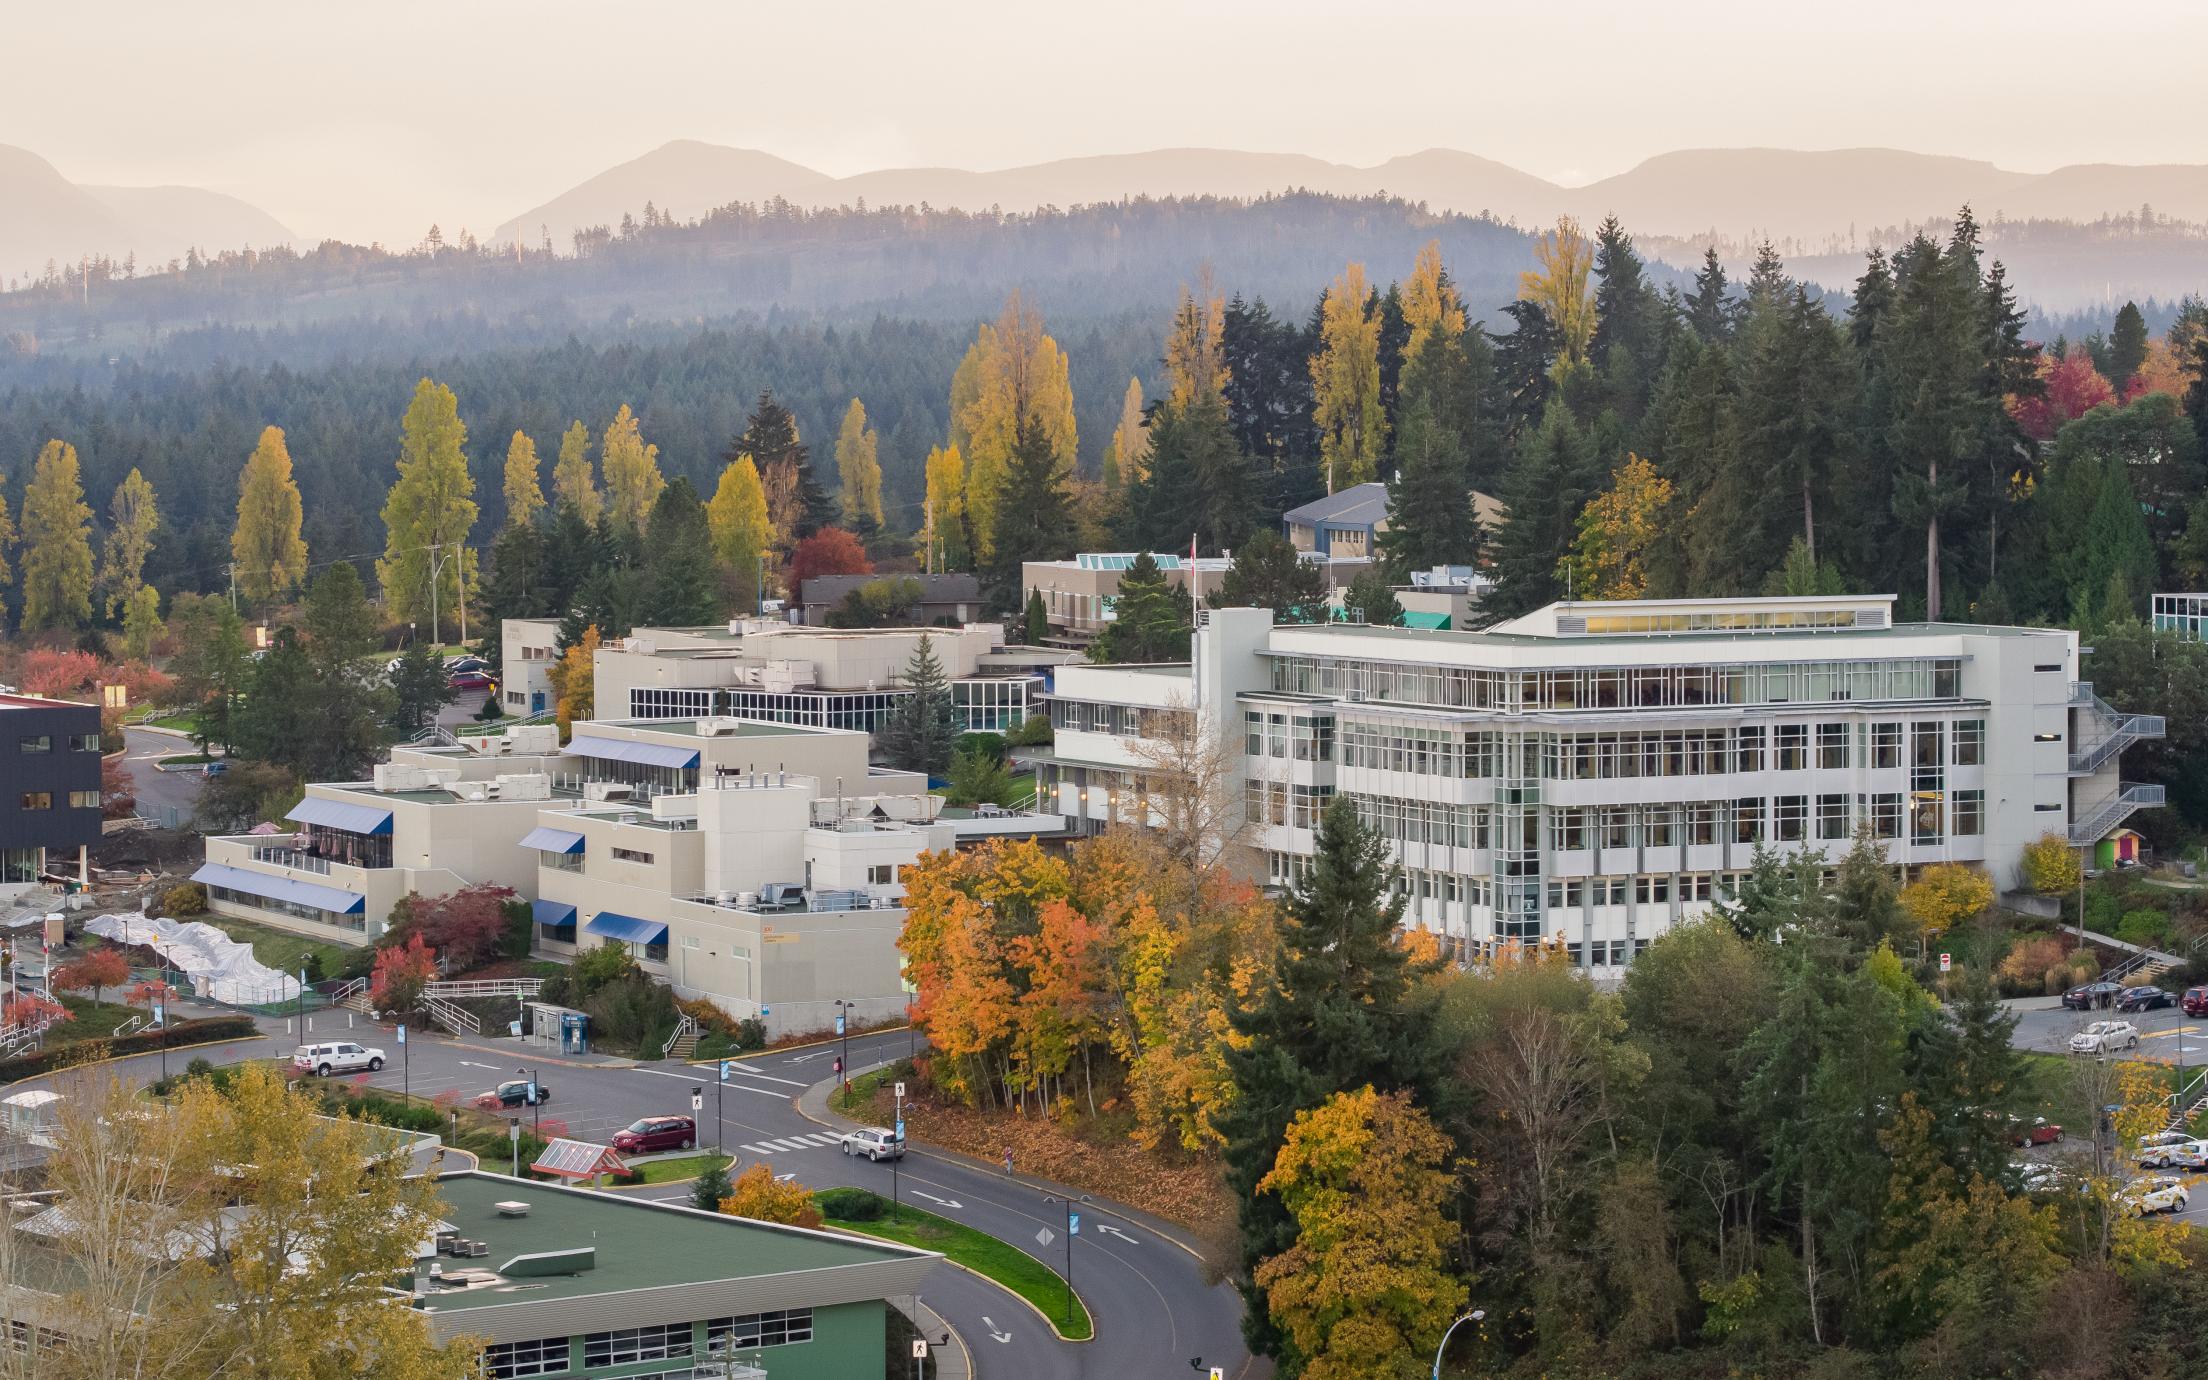 Vancouver Island University's Faculty of Education